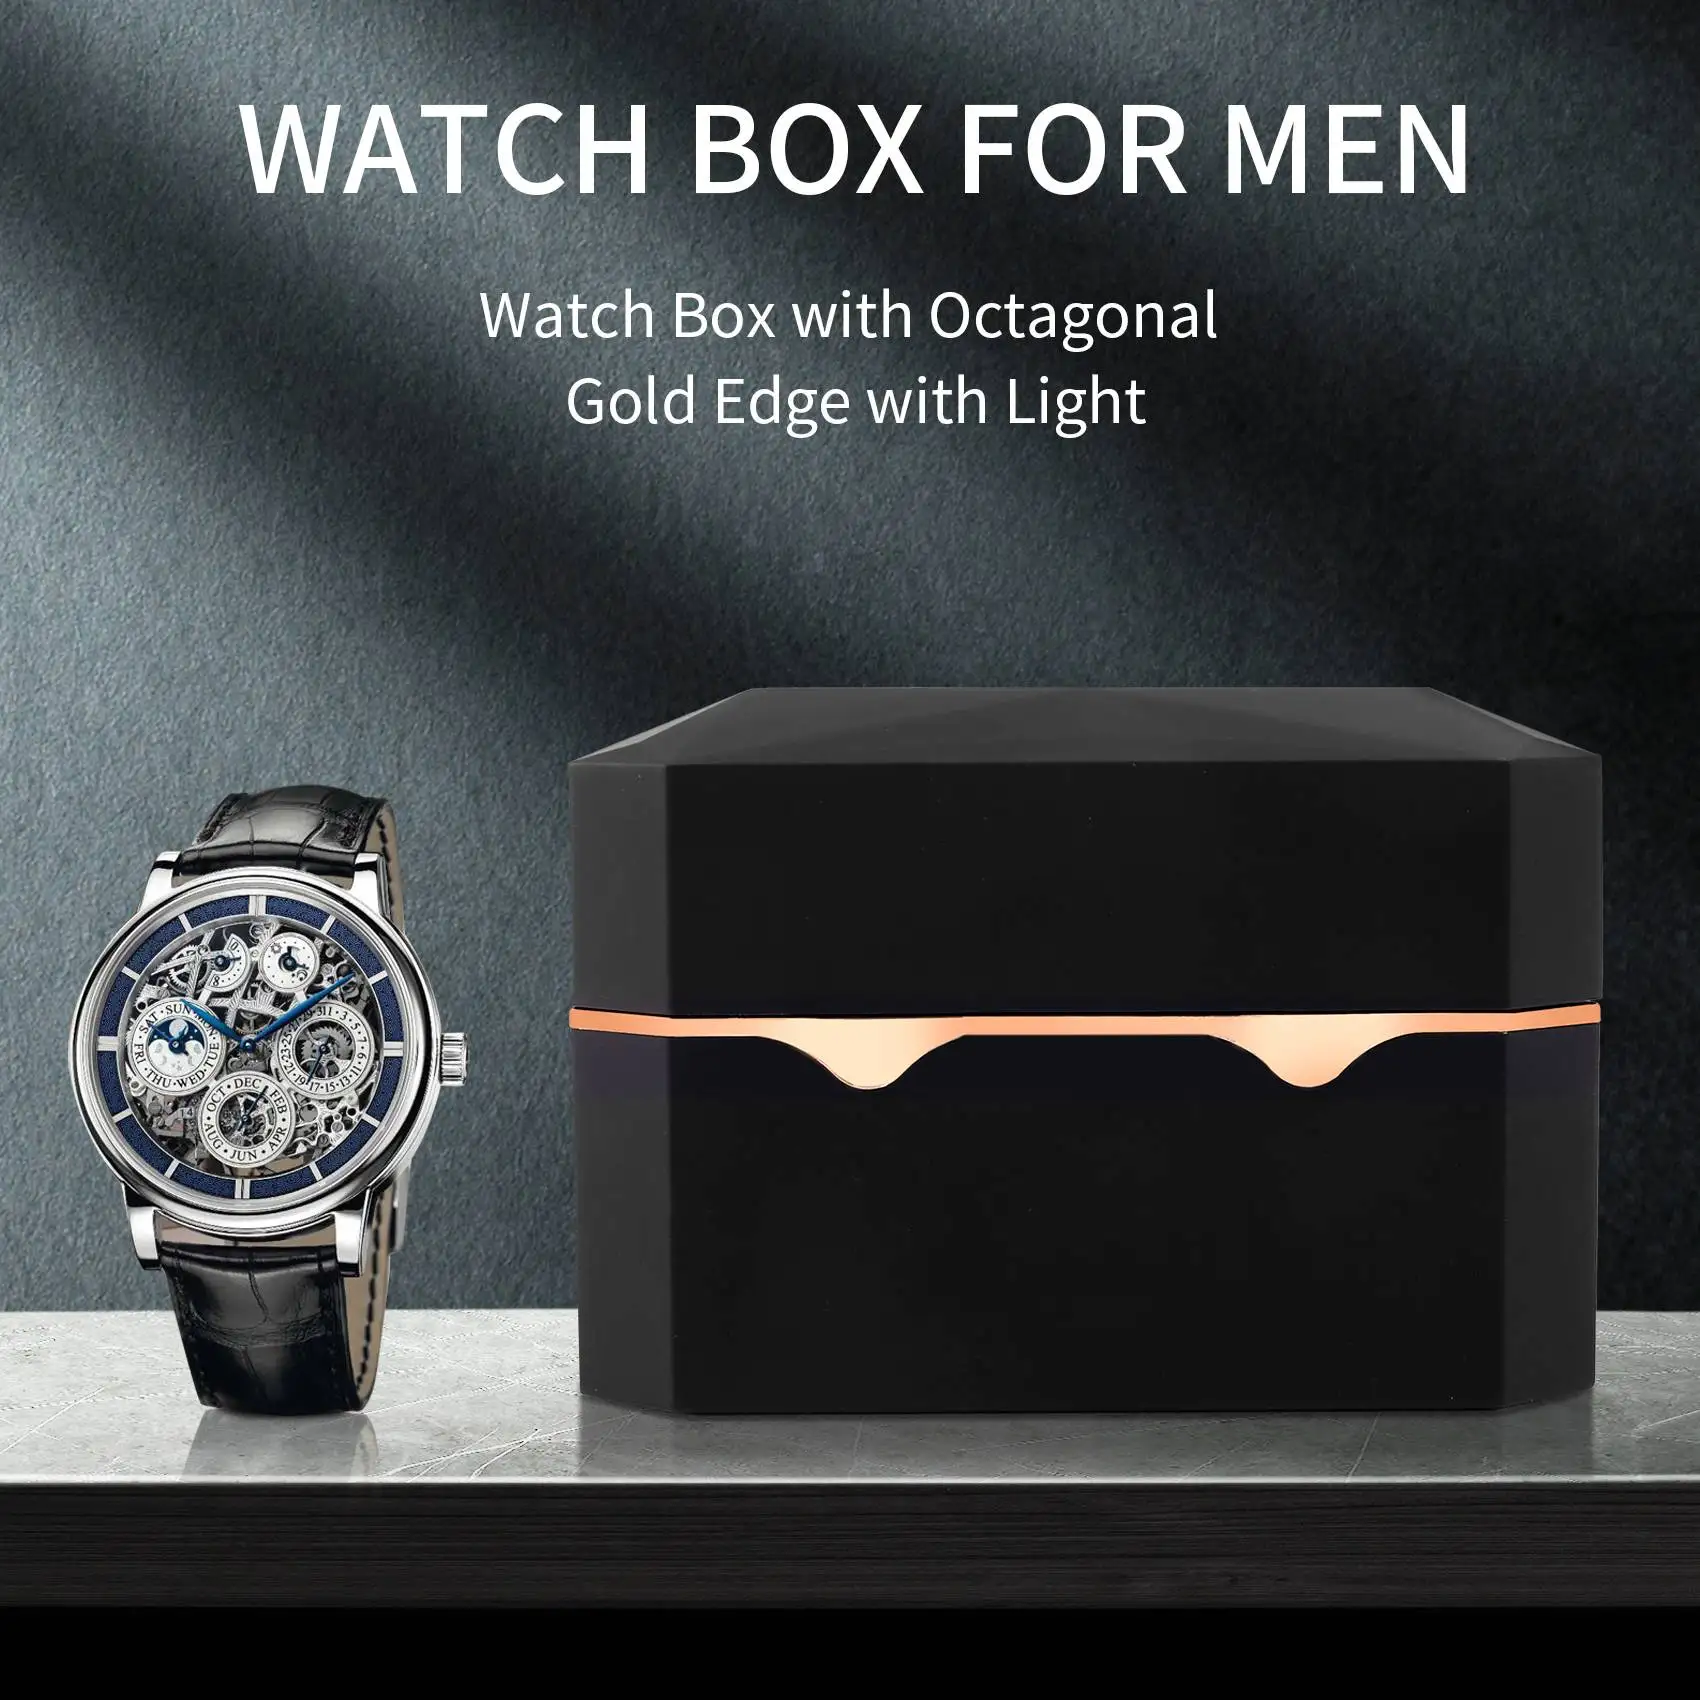 

Watch Box with Octagonal Gold Edge with Light, Paint Watch Storage Box, Watch Box, Watch Box